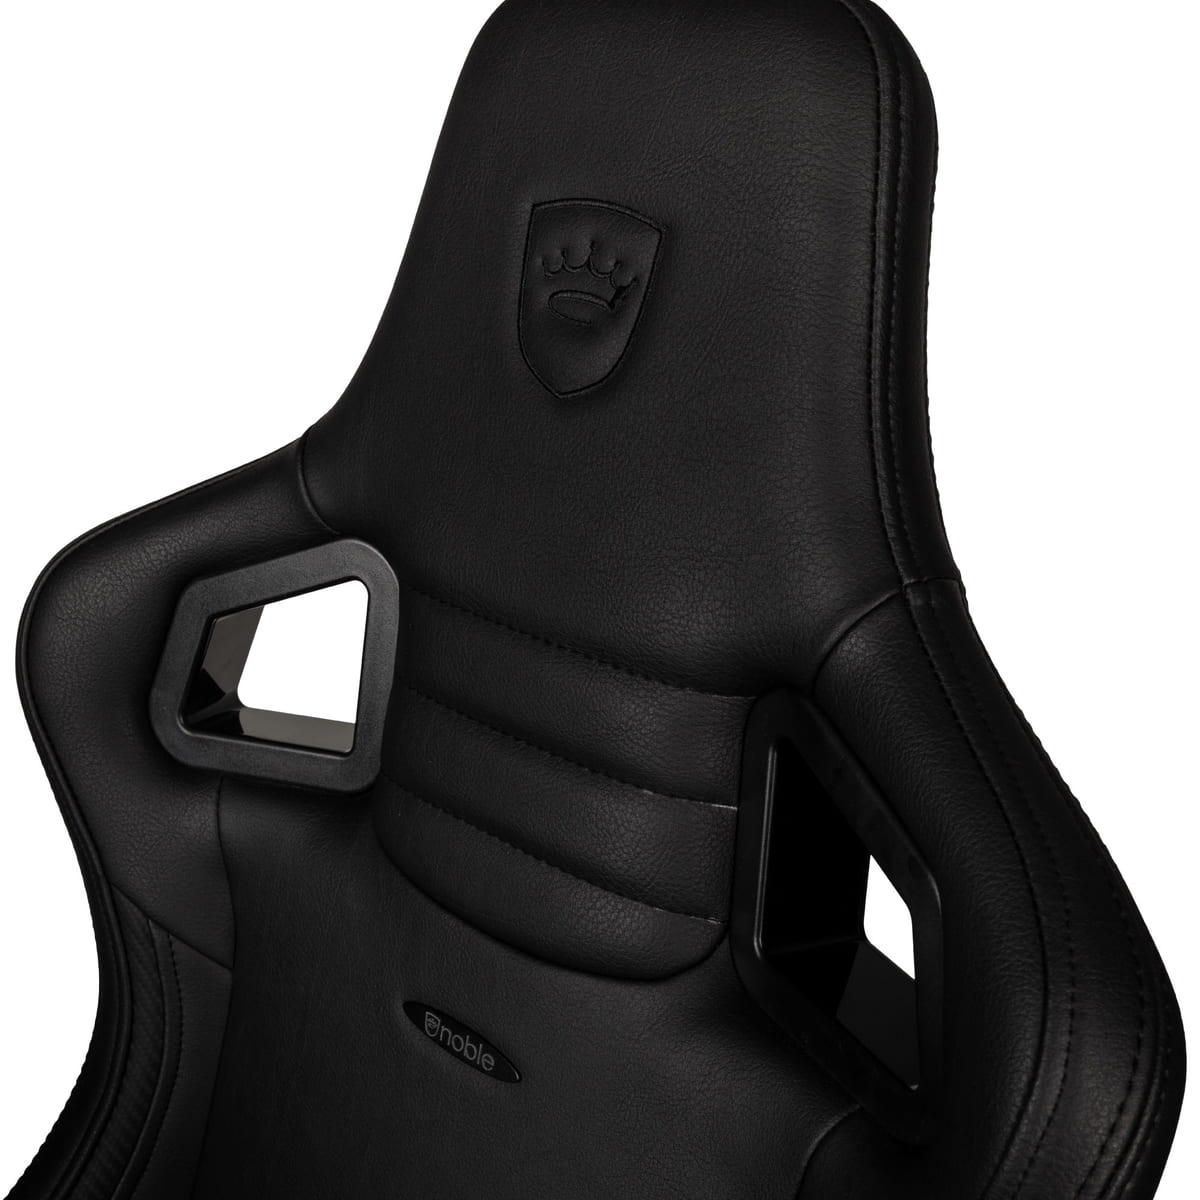 noblechairs(ノーブルチェアーズ)「EPIC COMPACT」８